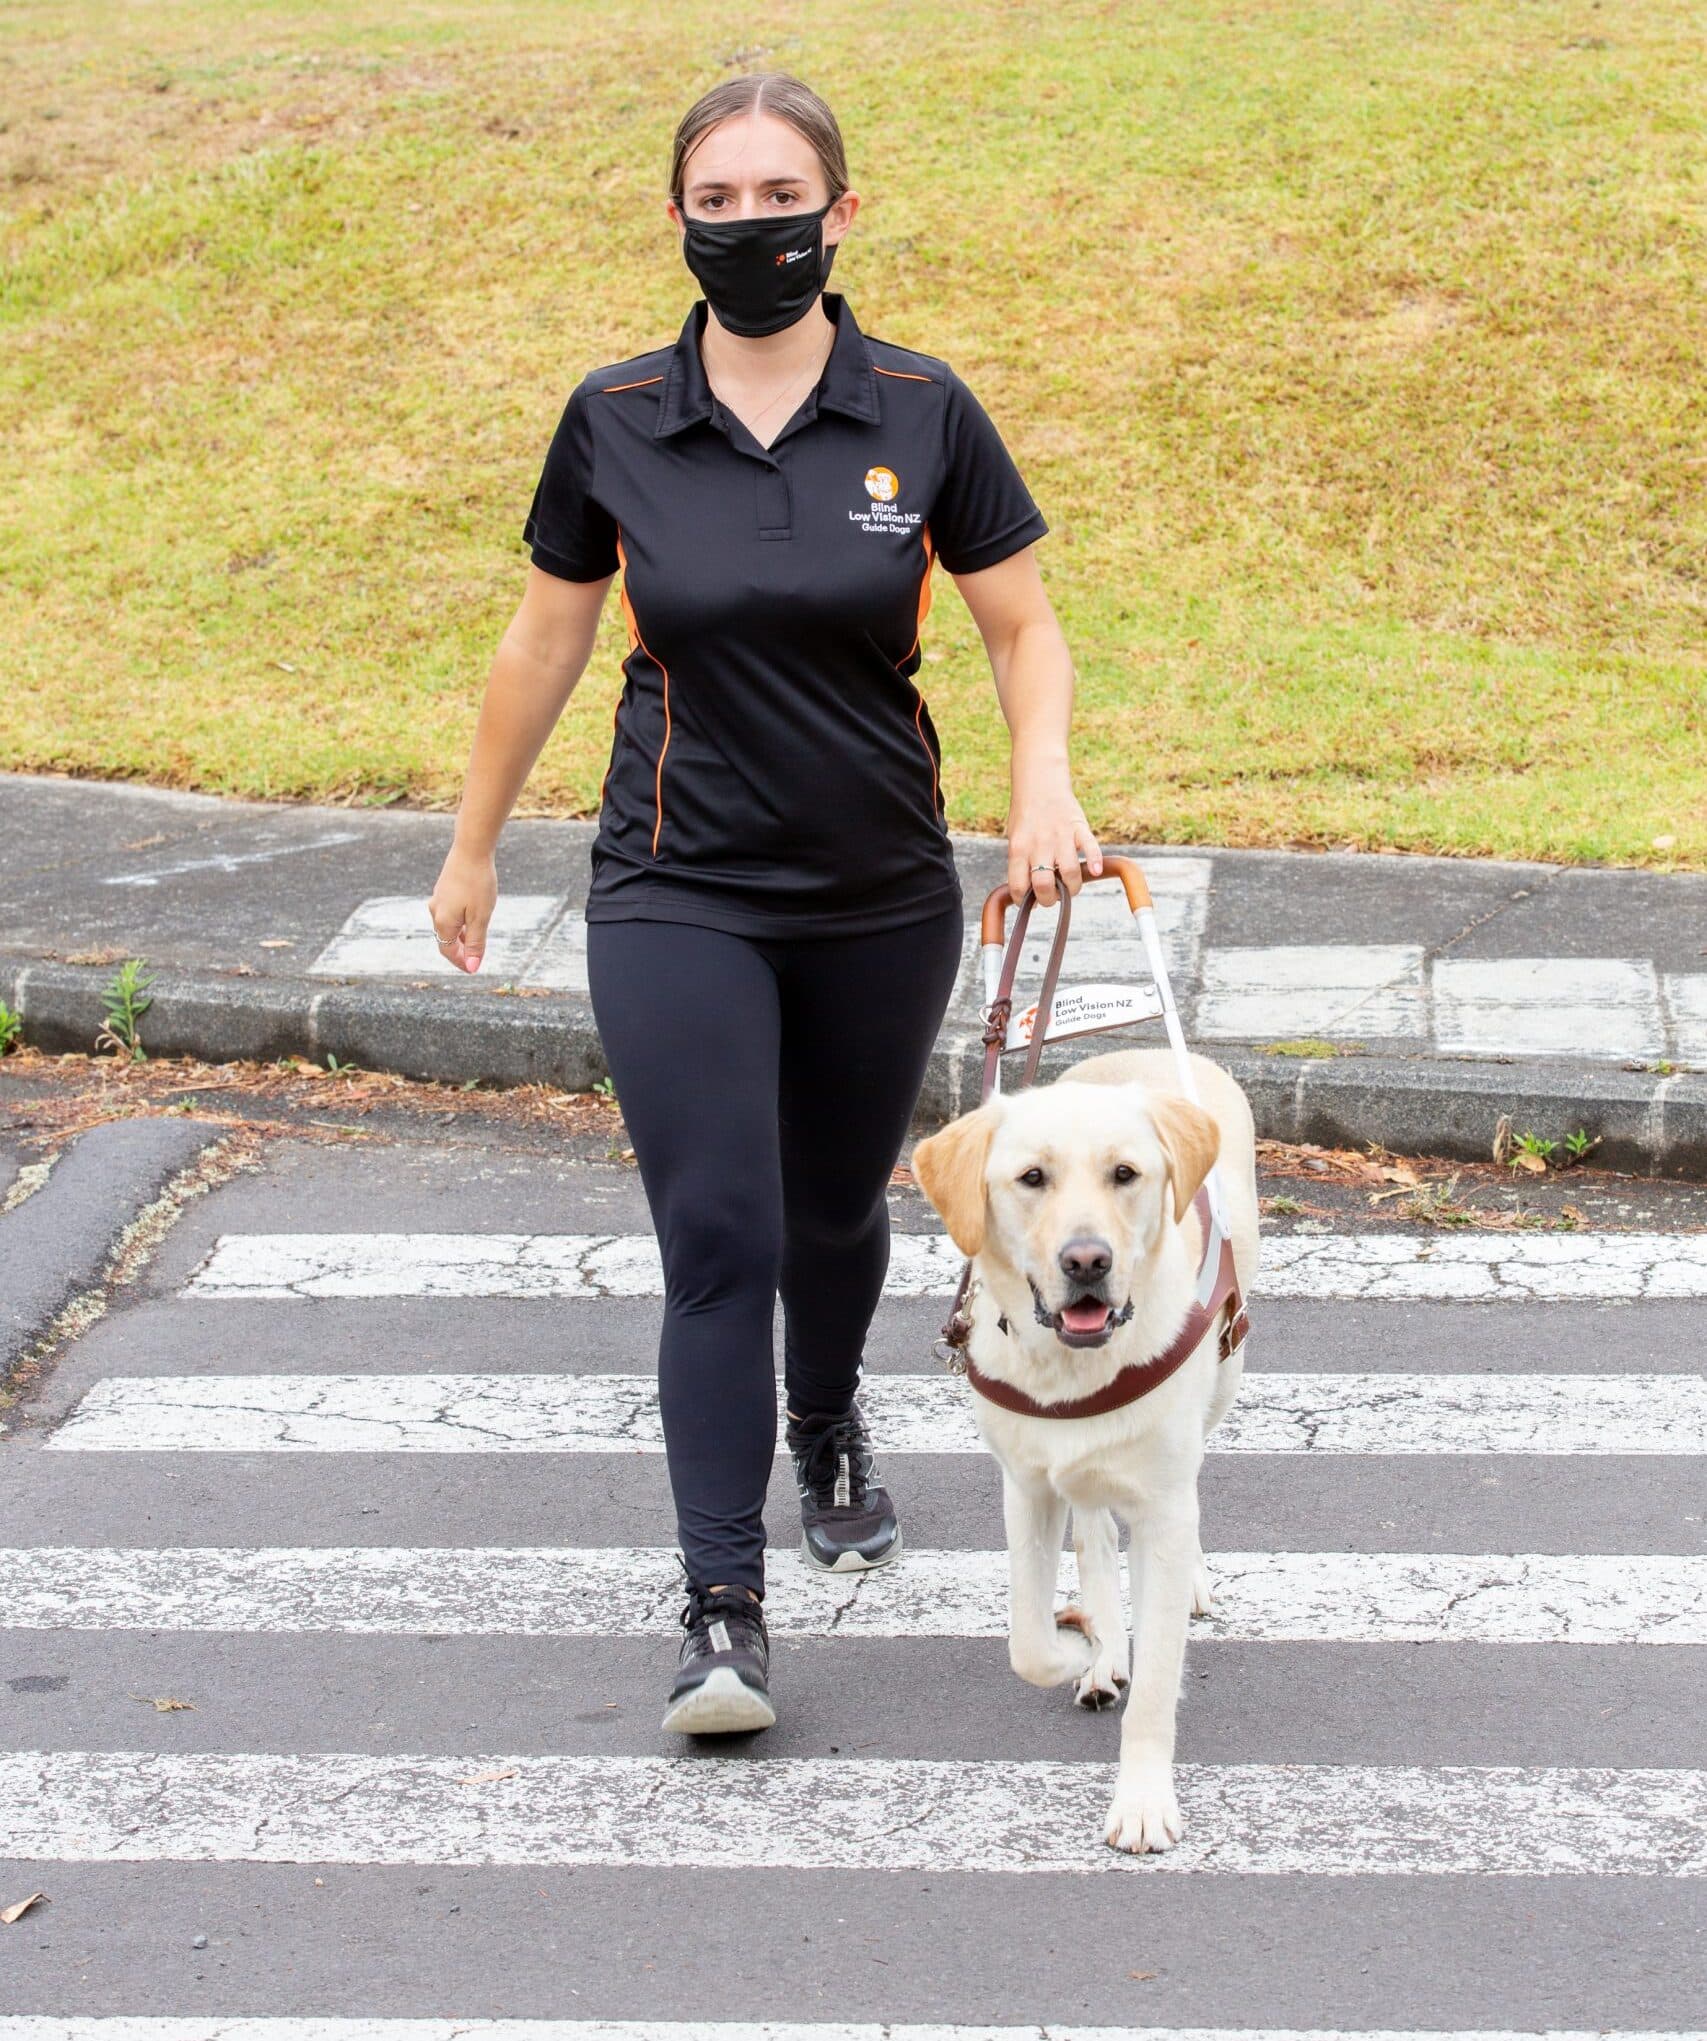 A Guide Dog Mobility Instructor is out training a guide dog. They are crossing at a pedestrian crossing and walking towards the camera.